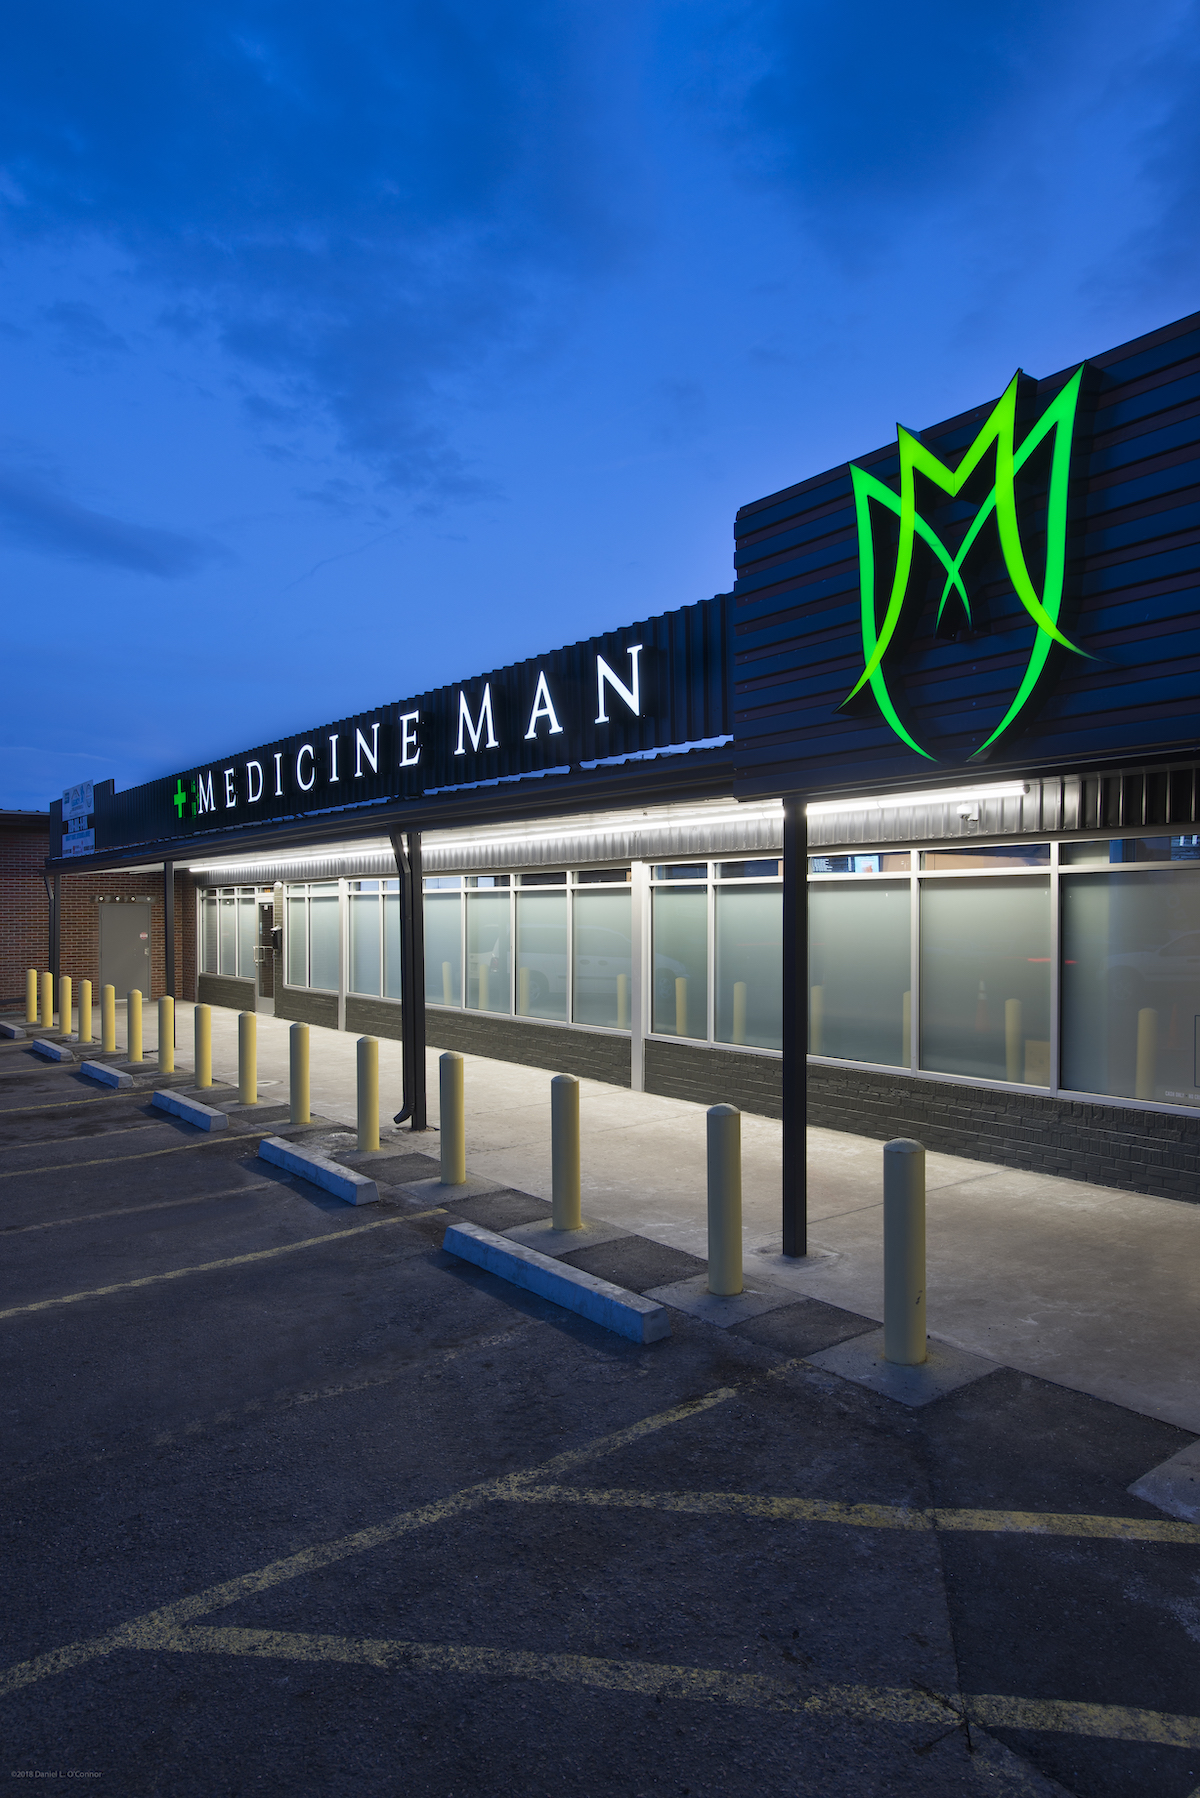 outside a dispensary at dusk building is black with green light up flower logo